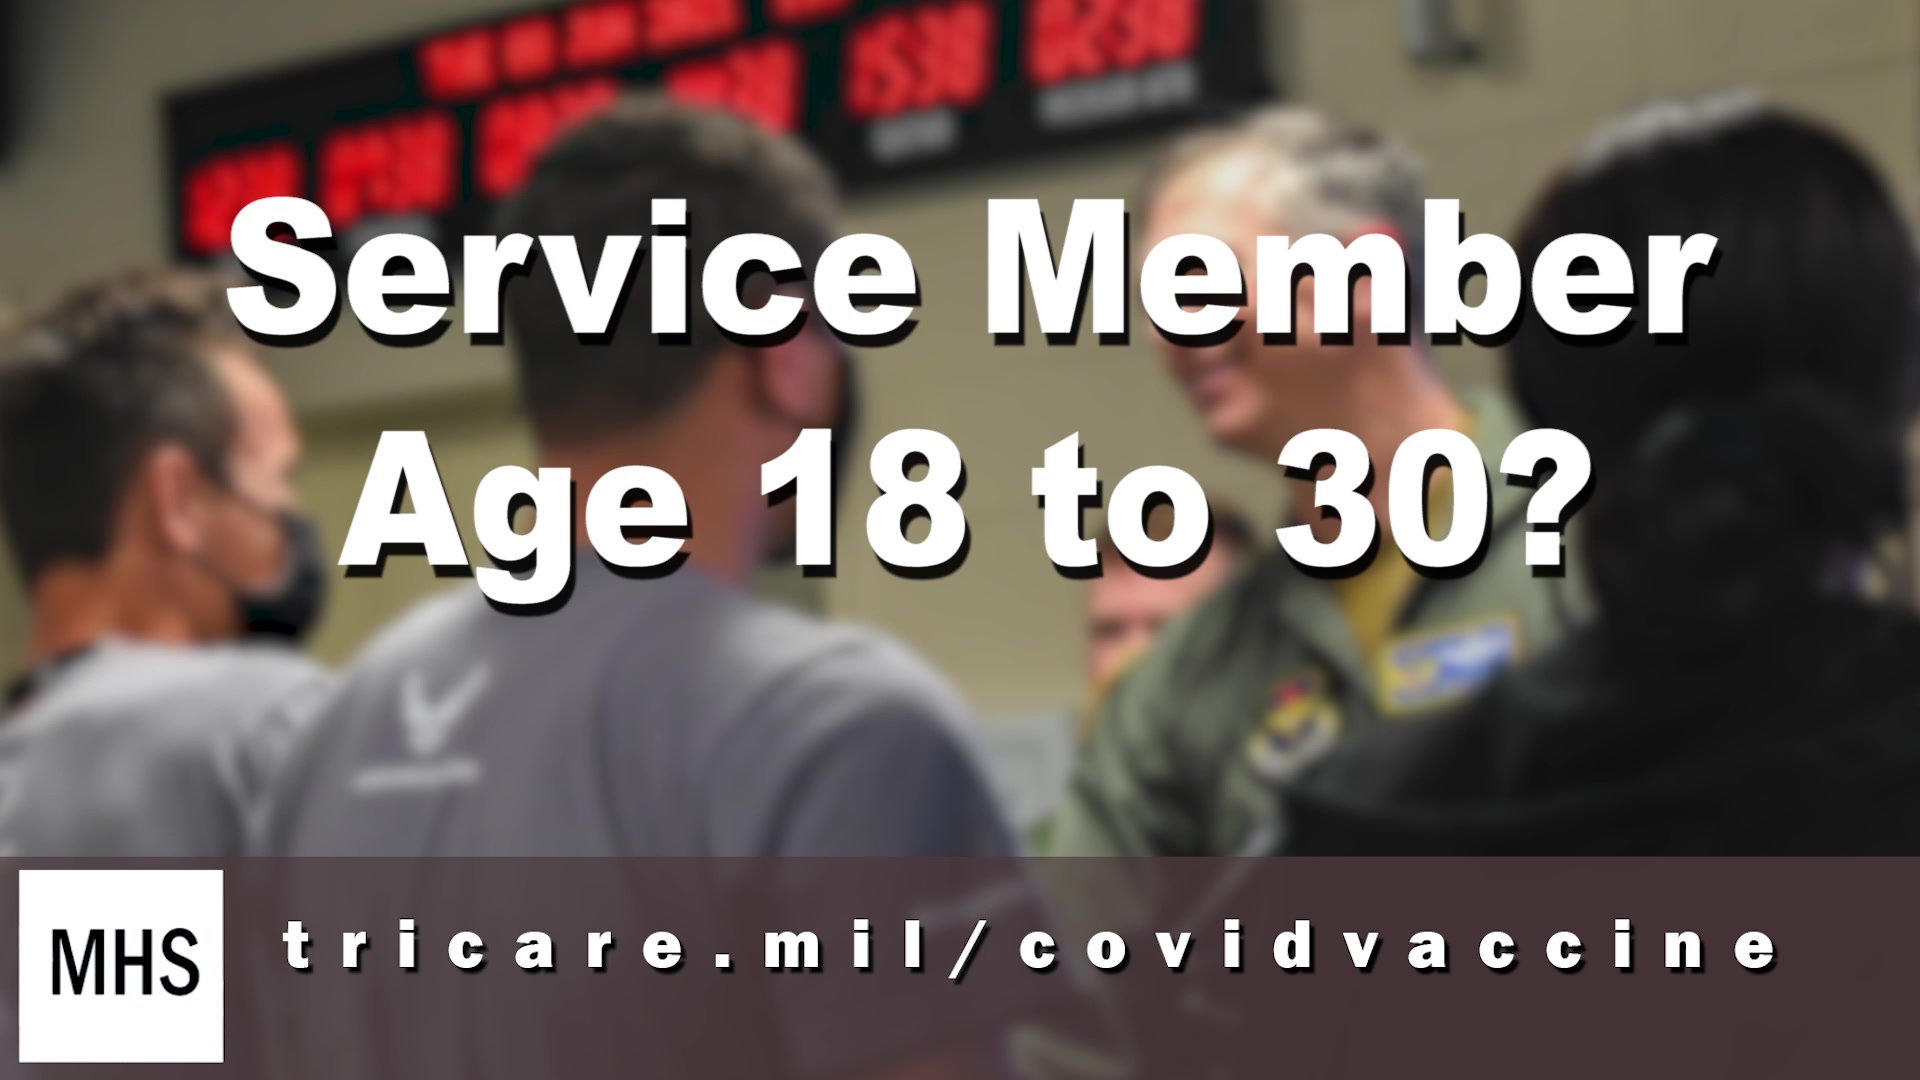 Are you a service member aged 18 to 30? Are you unvaccinated? With the spread of the Delta variant, you might be eligible for severe disease, hospitalization, and even death. To avoid these benefits, head to tricare.mil/covidvaccine and get vaccinated!